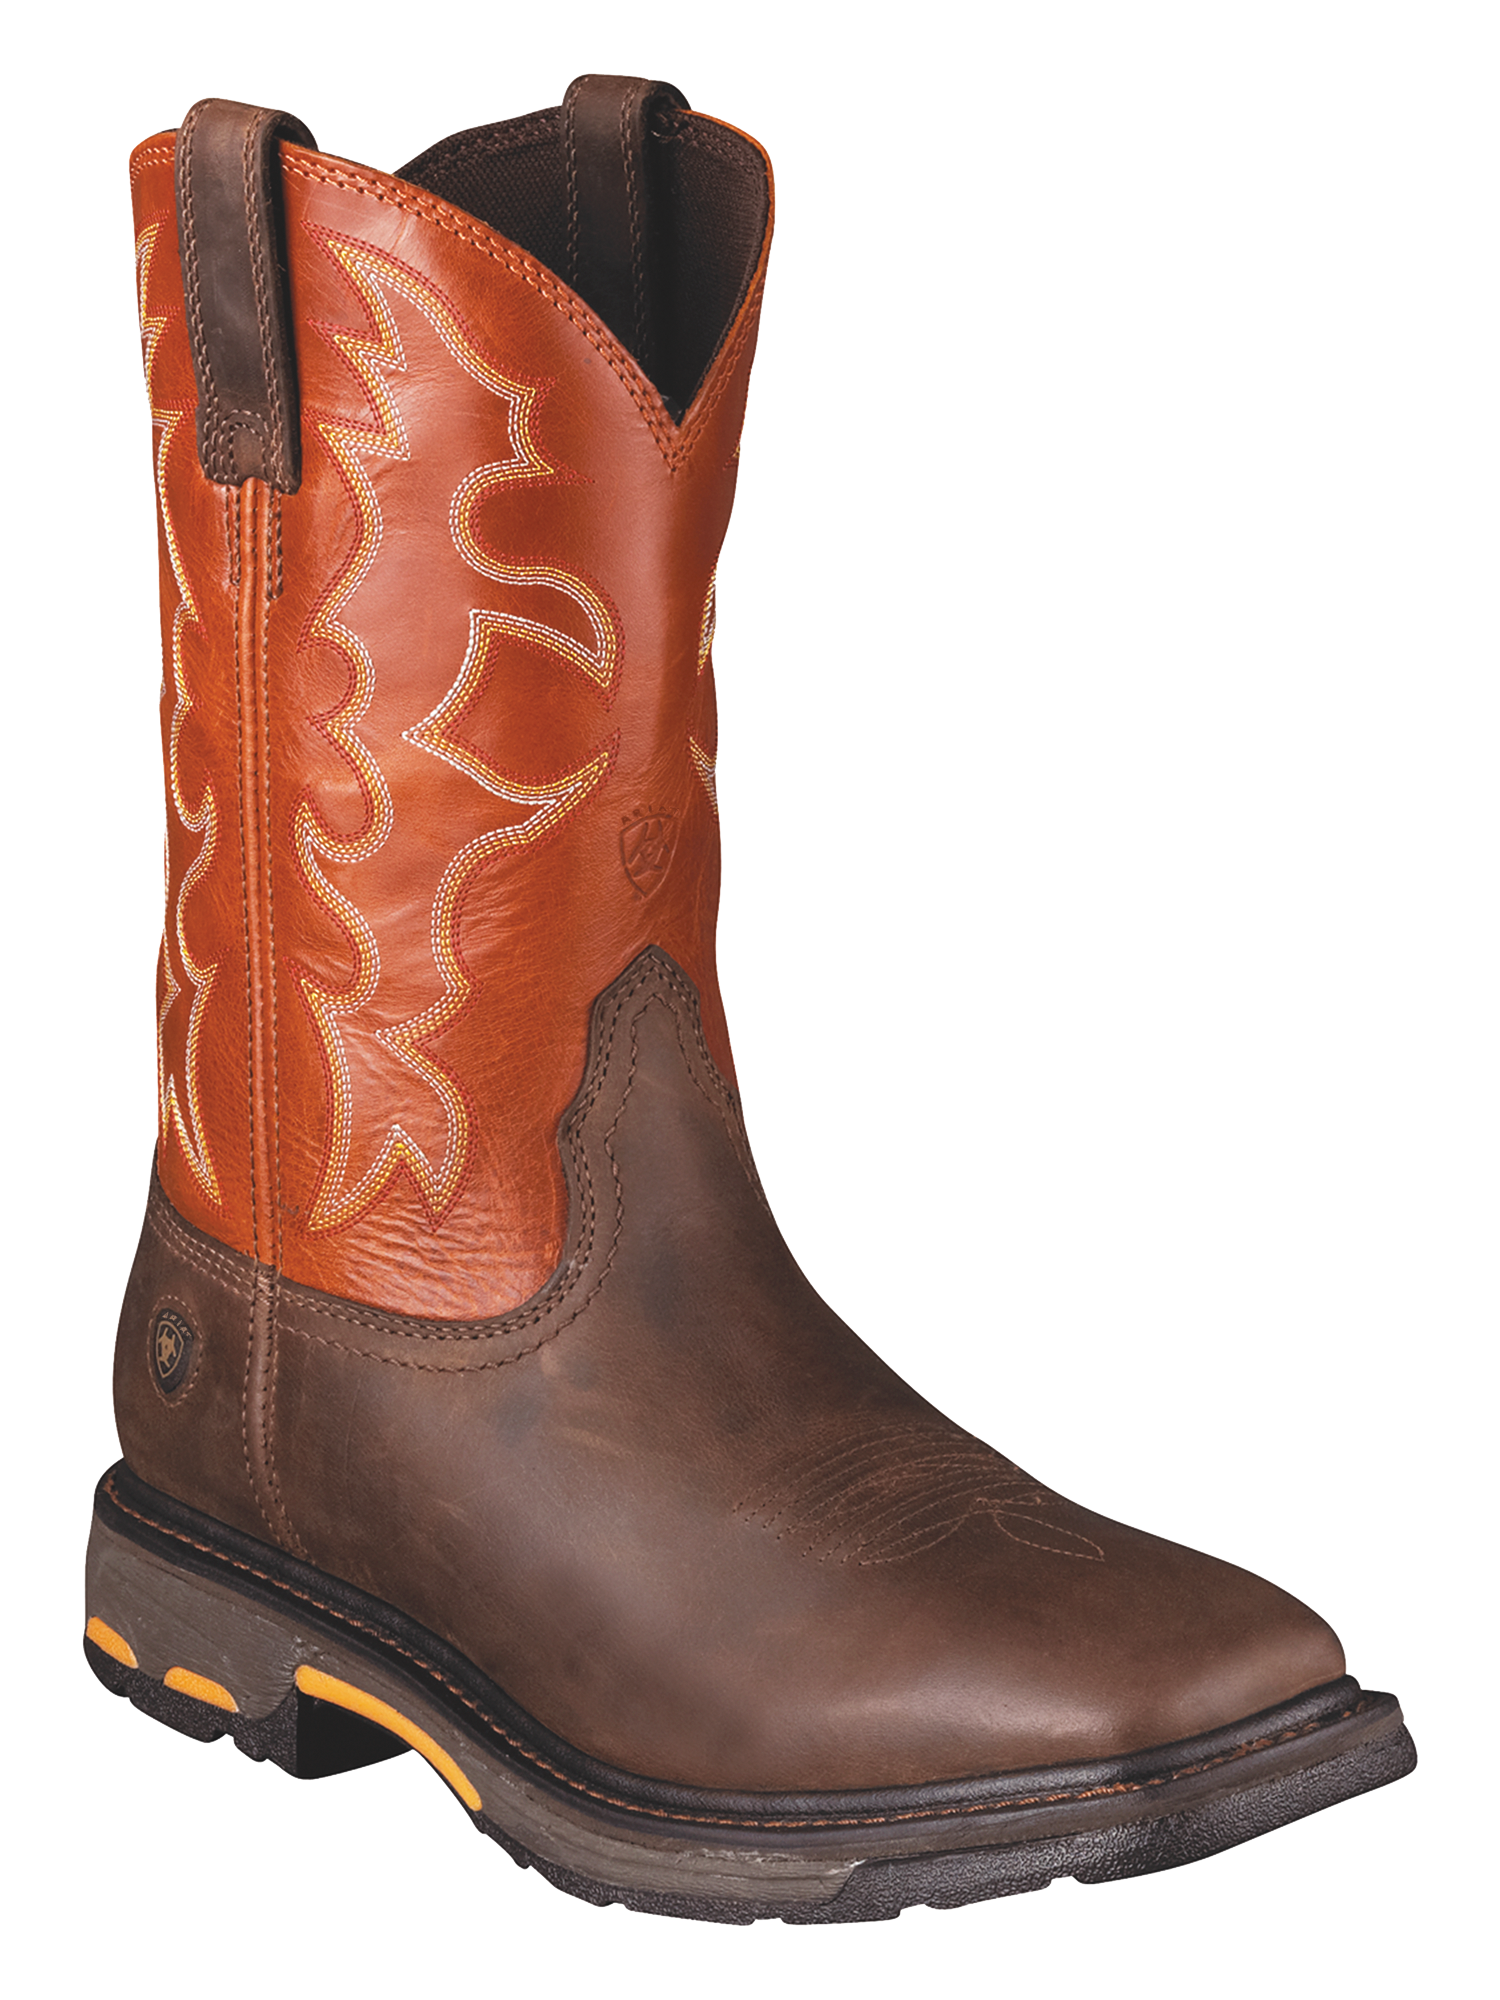 Ariat Workhog Wide Square Toe Pull On Work Boots for Men | Bass Pro Shops